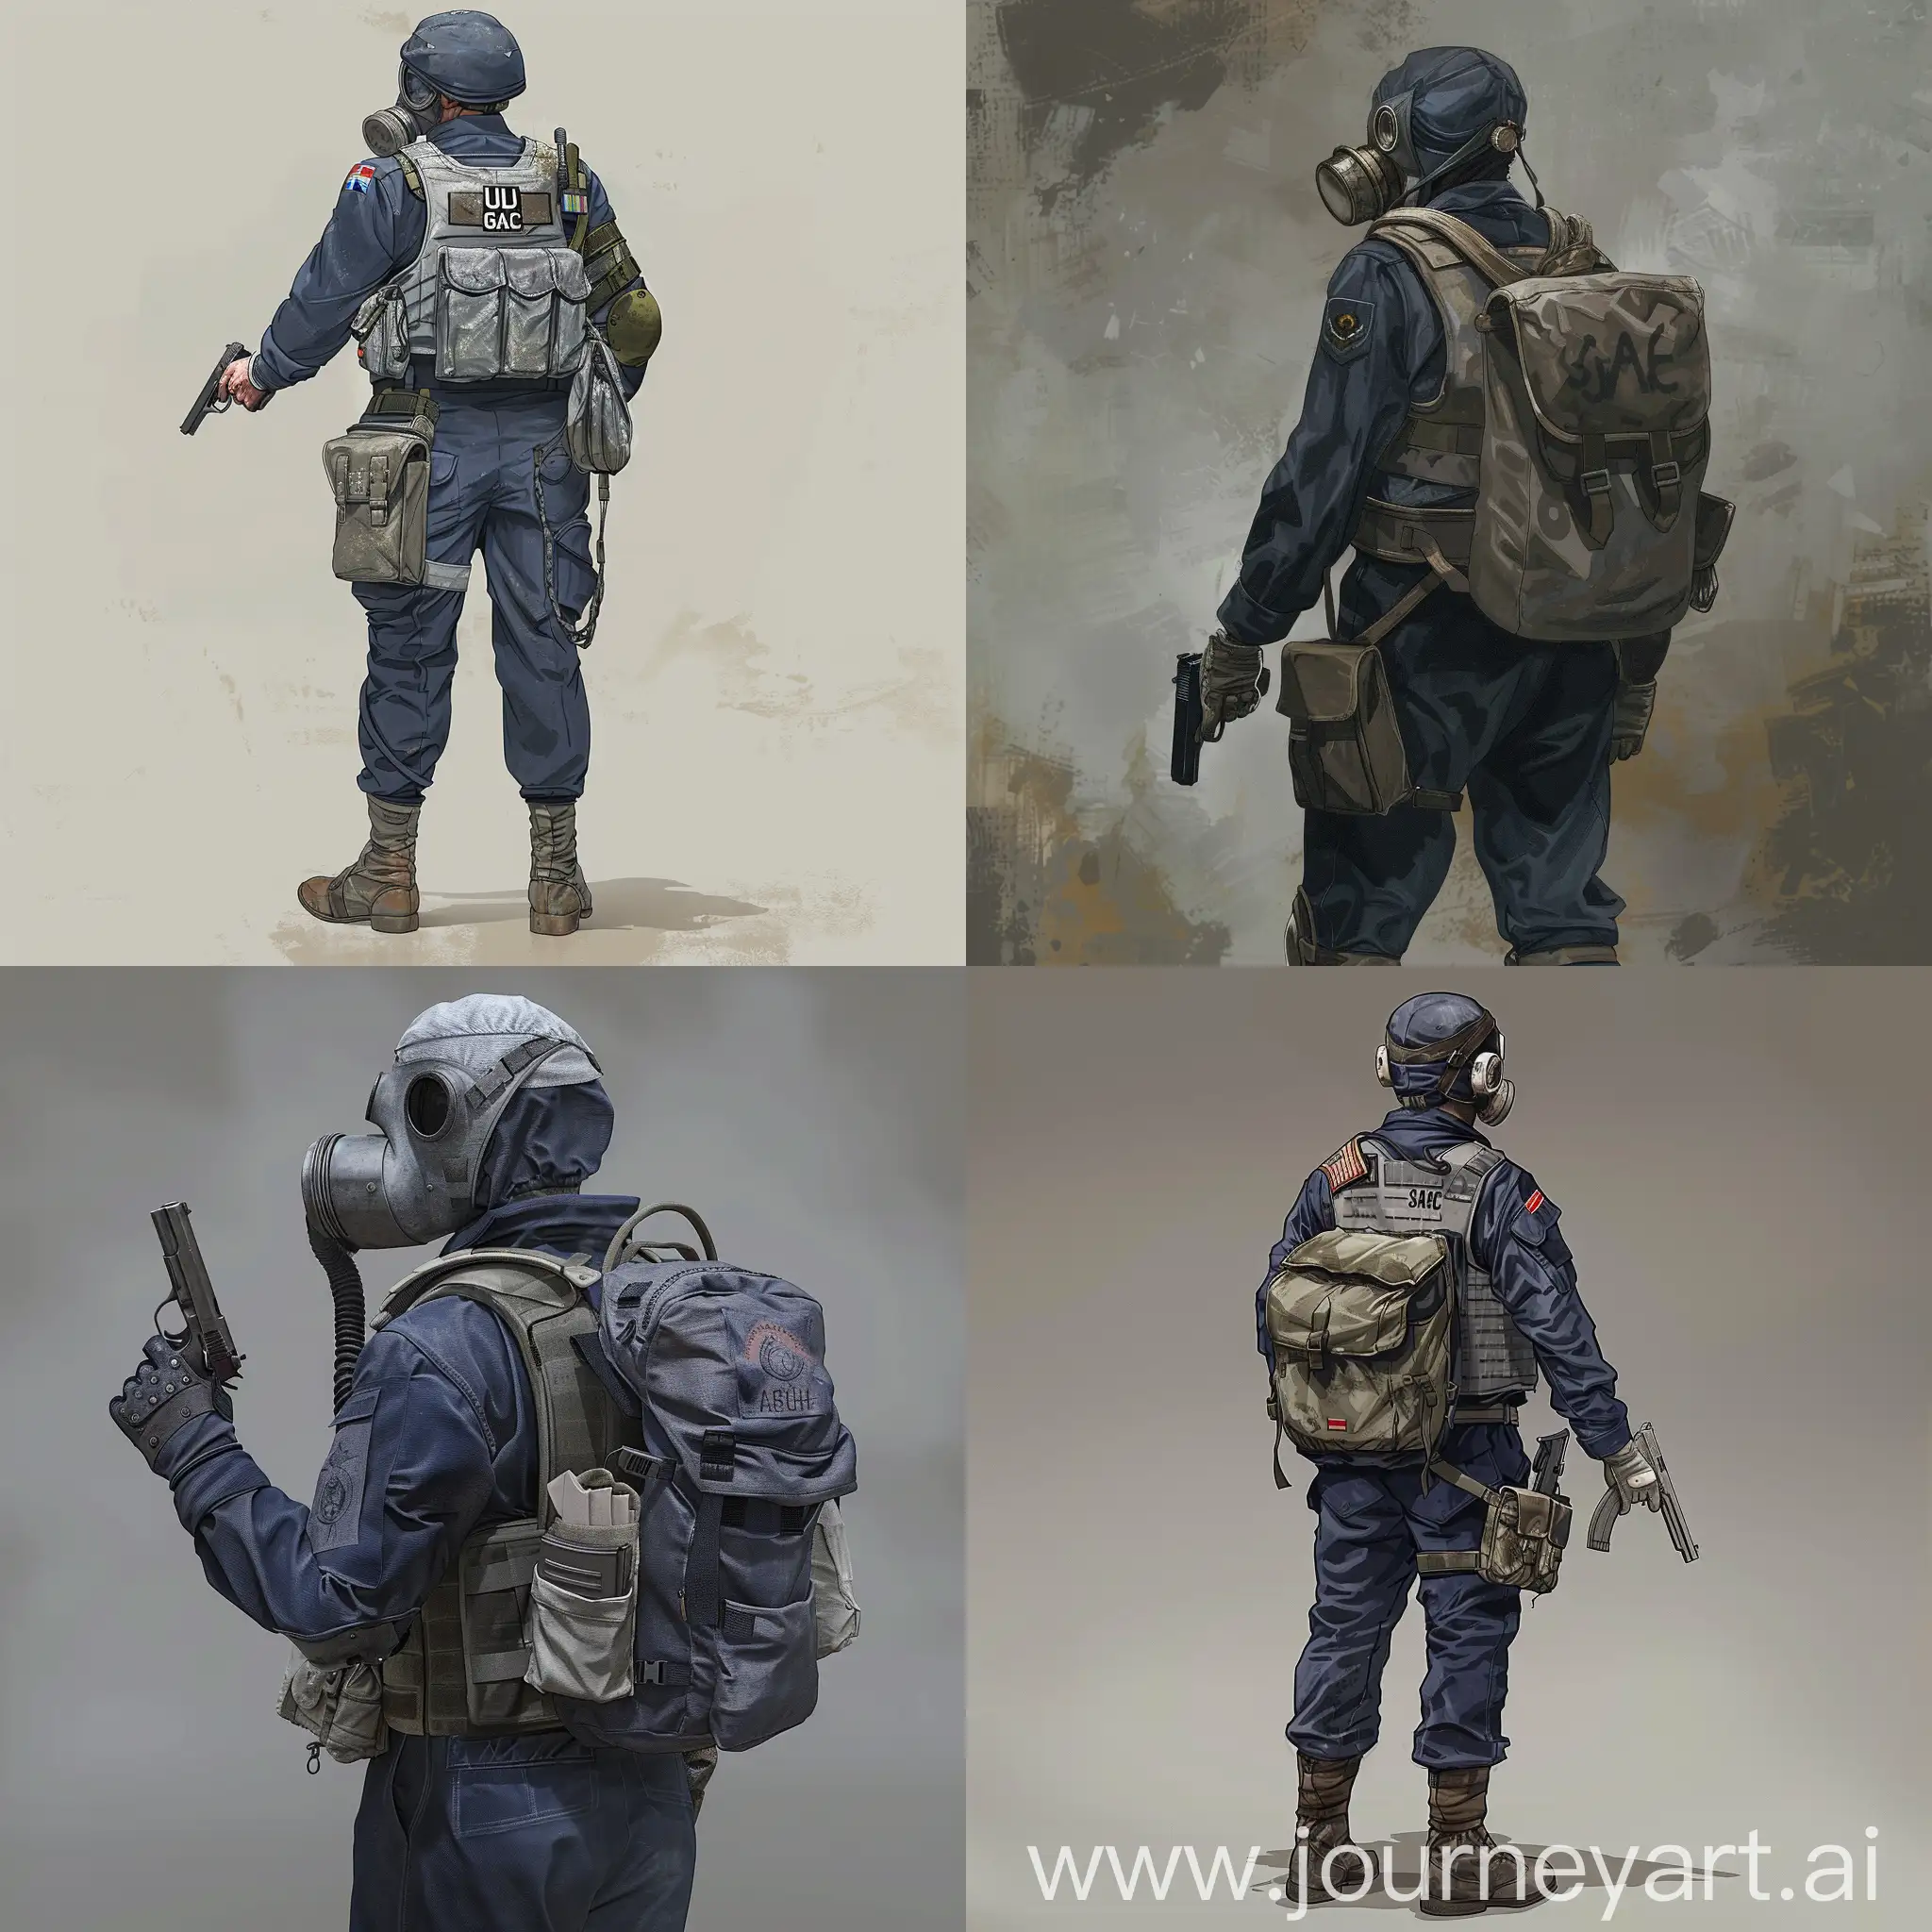 Concept art character British SAS 1960 year, dark blue uniform, gray military vest, gasmask, pistol in one arm, small military backpack on the back.